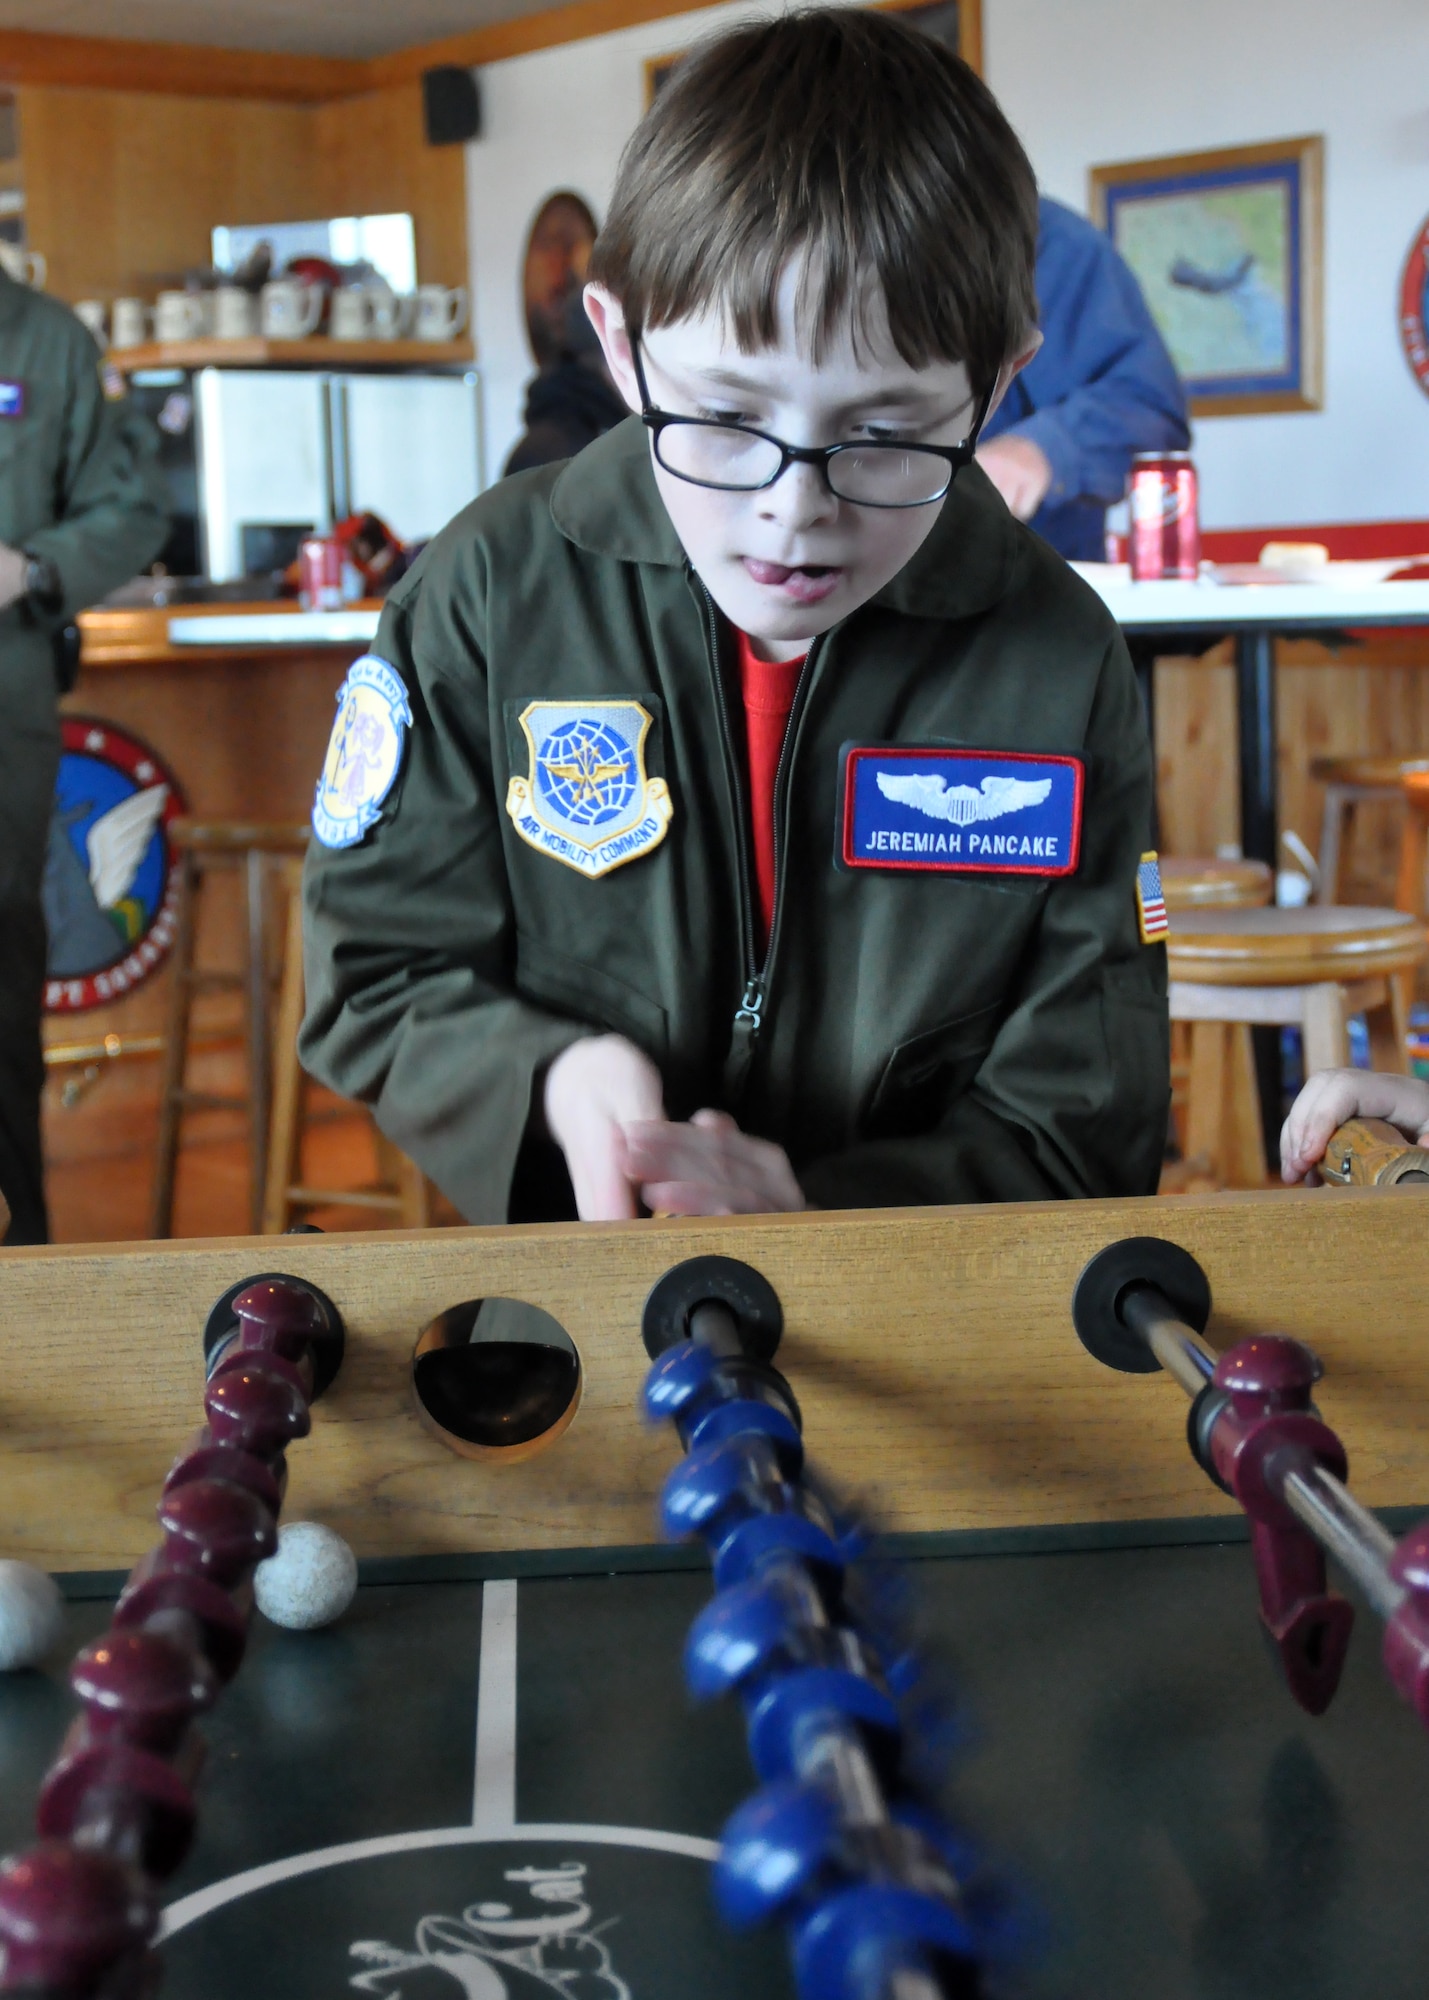 Jeremiah Pancake plays foosball at the 4th Airlift Squadron as part of the Pilot for a Day program March 16, 2012, at Joint Base Lewis-McChord, Wash. (U.S. Air Force photo/Airman 1st Class Leah Young)